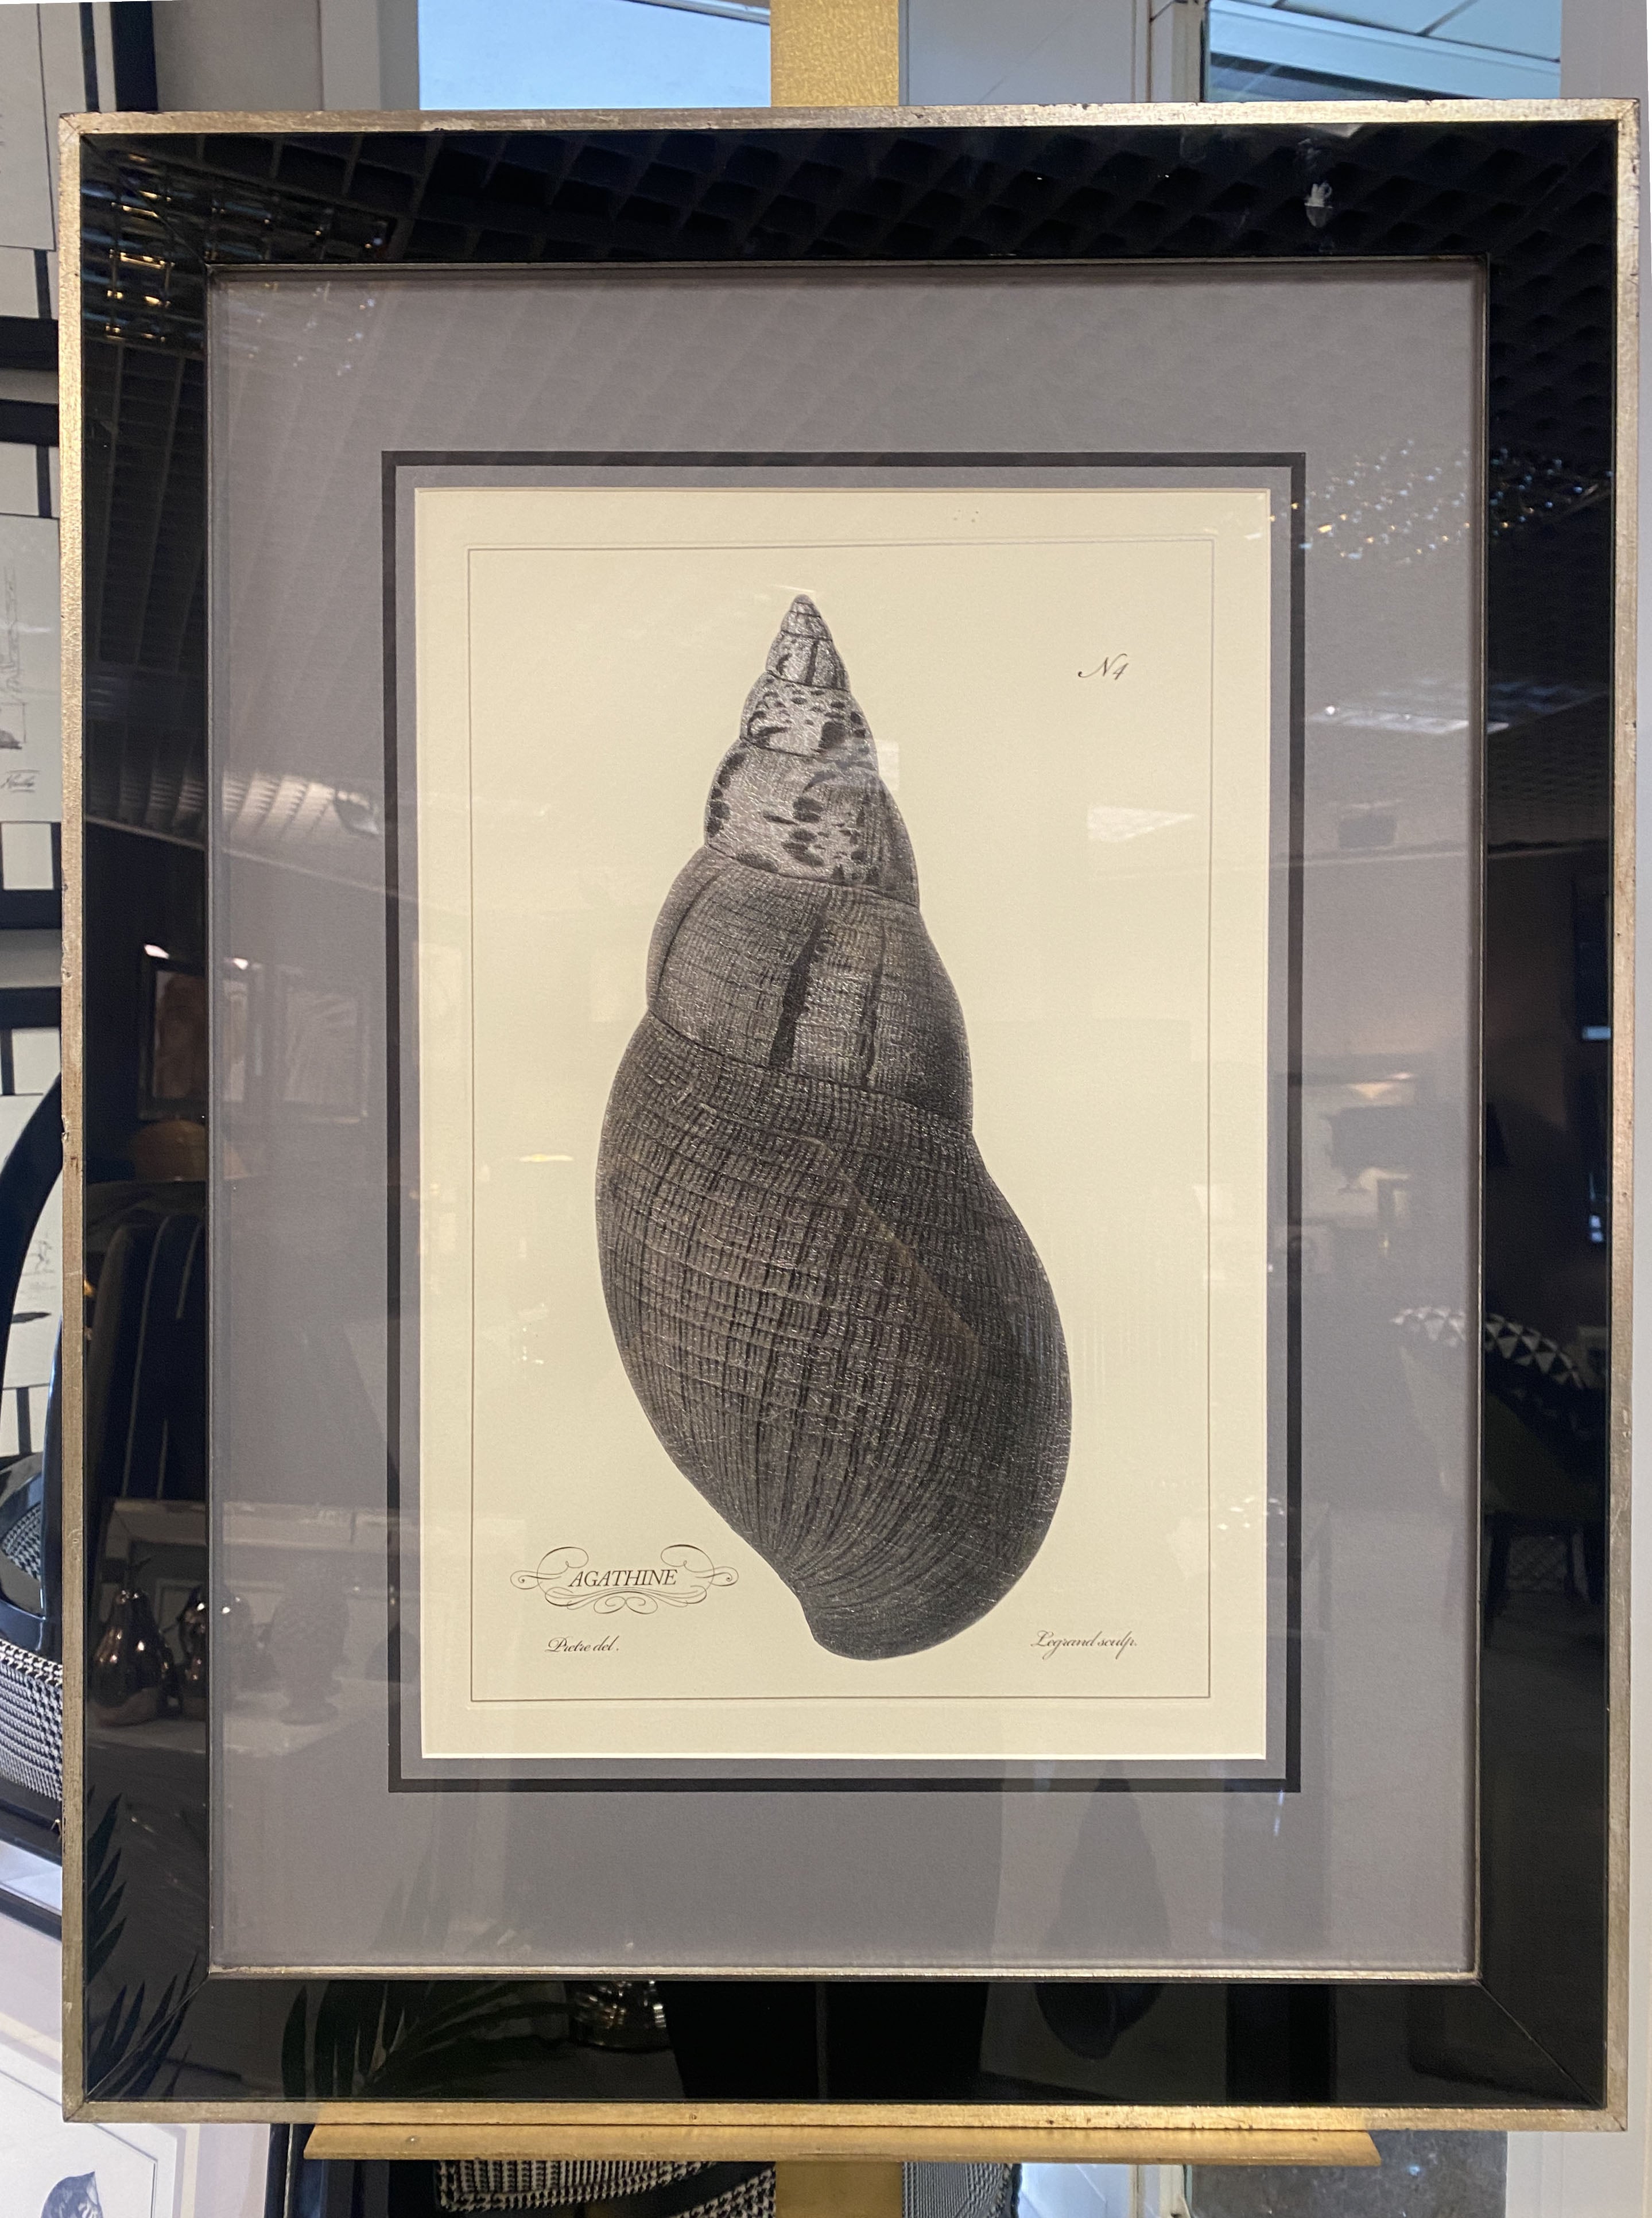 Elegant hand-watercoloured shell made by engraving on silver leaf, printed on aged paper and accompanied by a beautiful frame made of black mirrors and silver-painted wood.

This botanical style print is available in 2 different natural